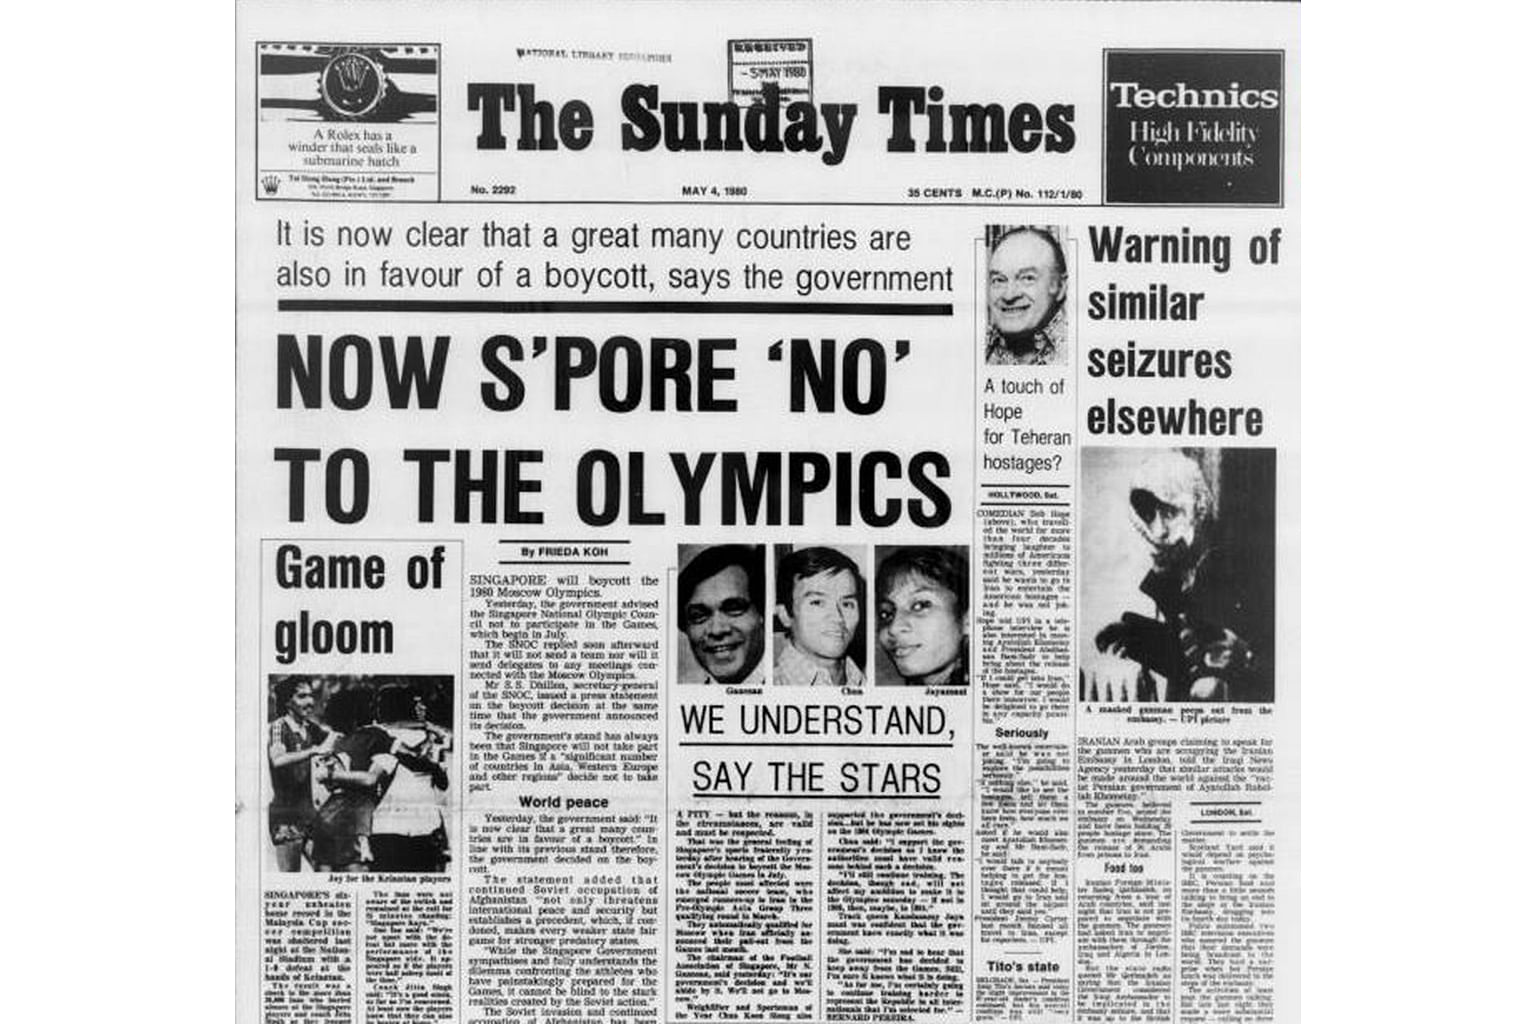 Learn: Why Singapore boycotted the 1980 Olympics.